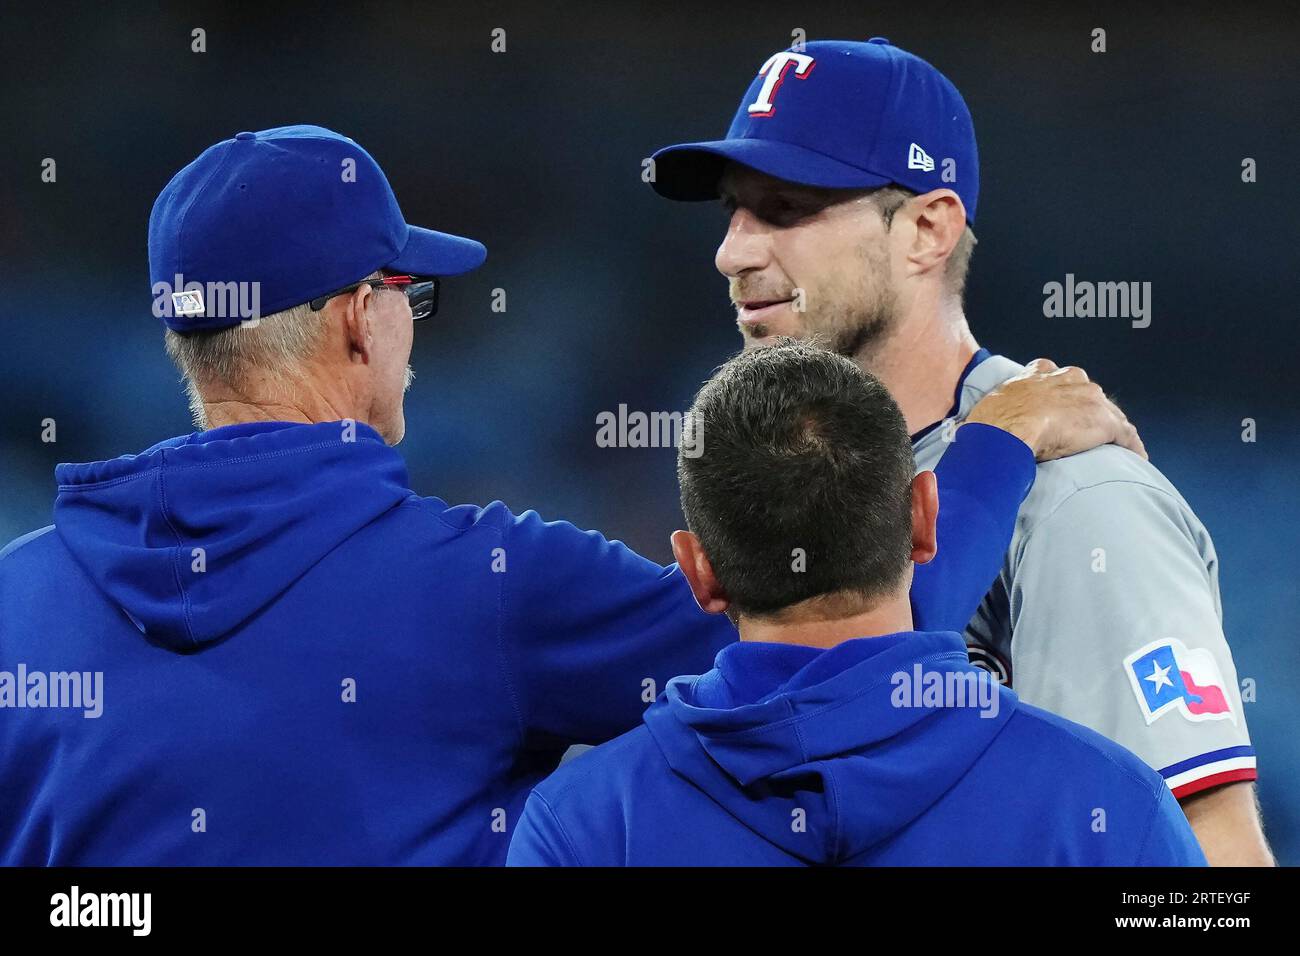 Texas Rangers bring back Mike Maddux as pitching coach